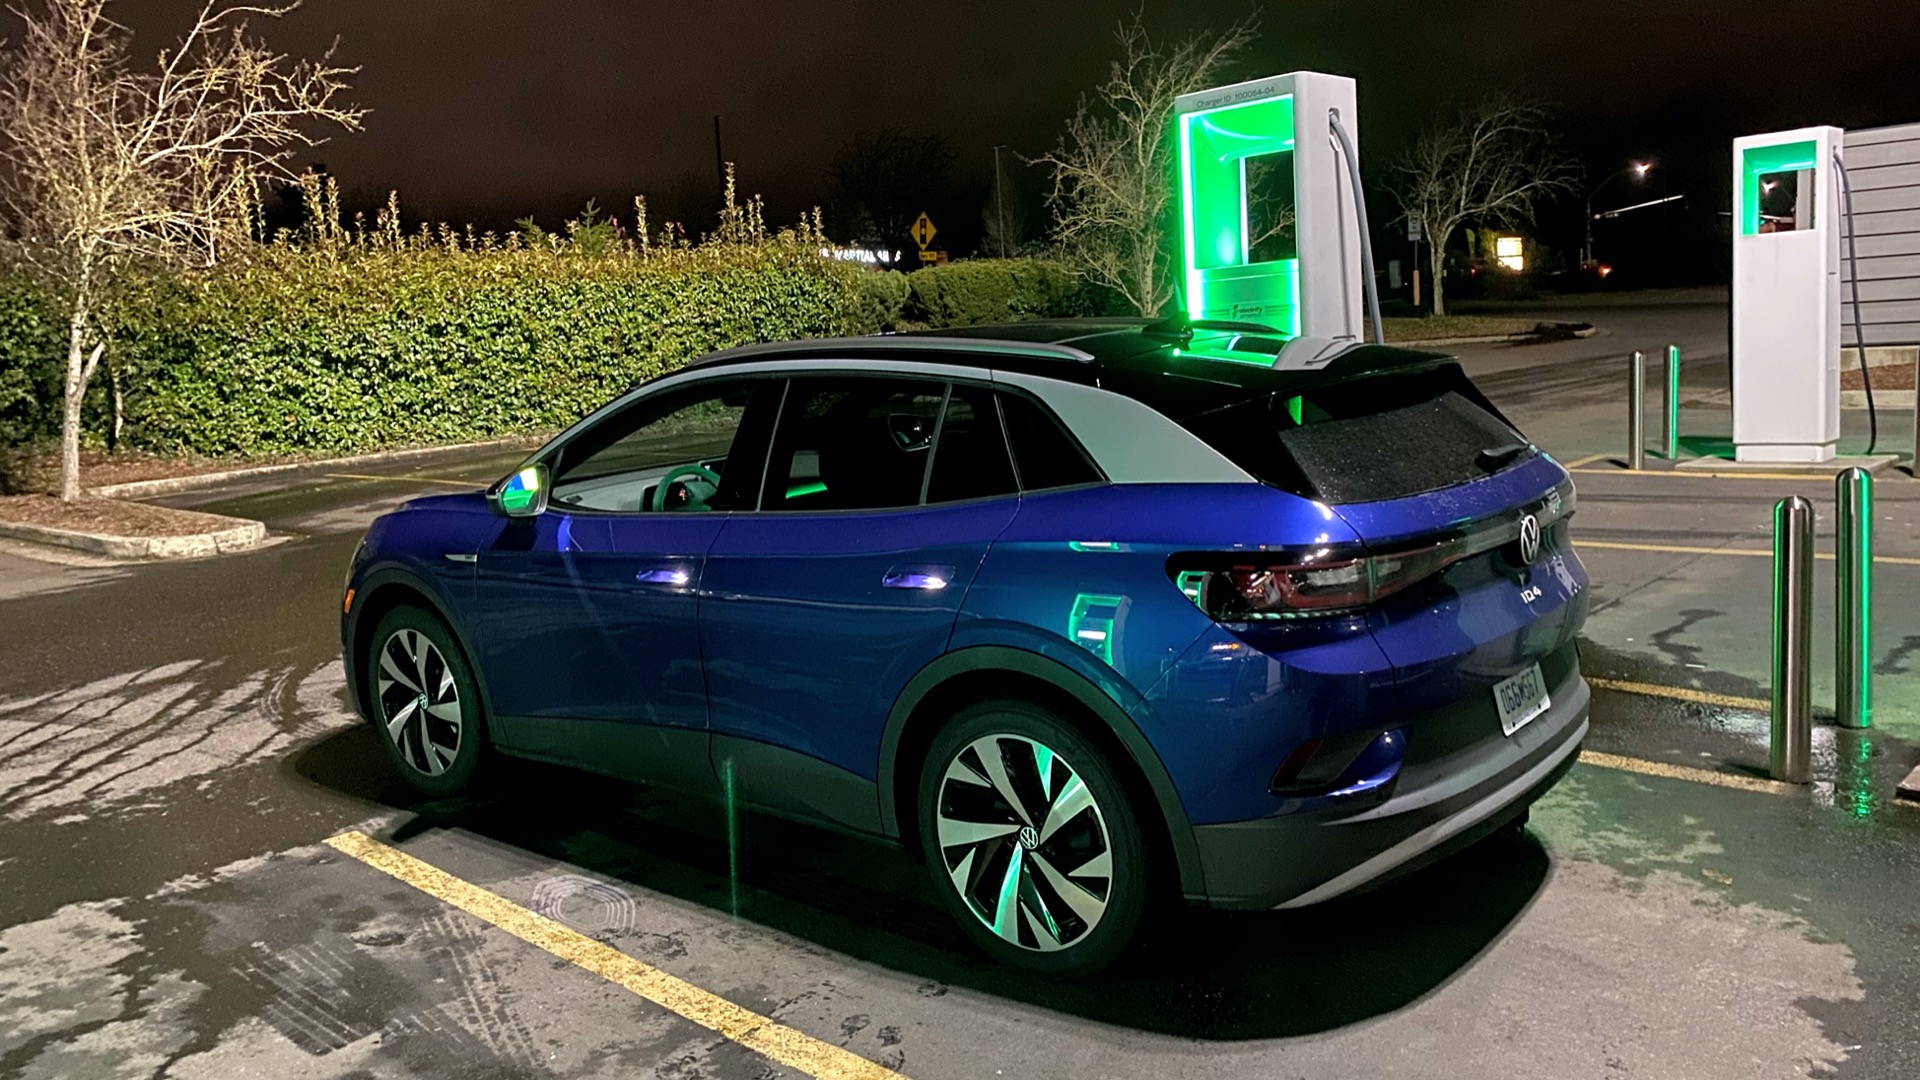 VW ID.4 will get Plug and Charge convenience soon with OTA update